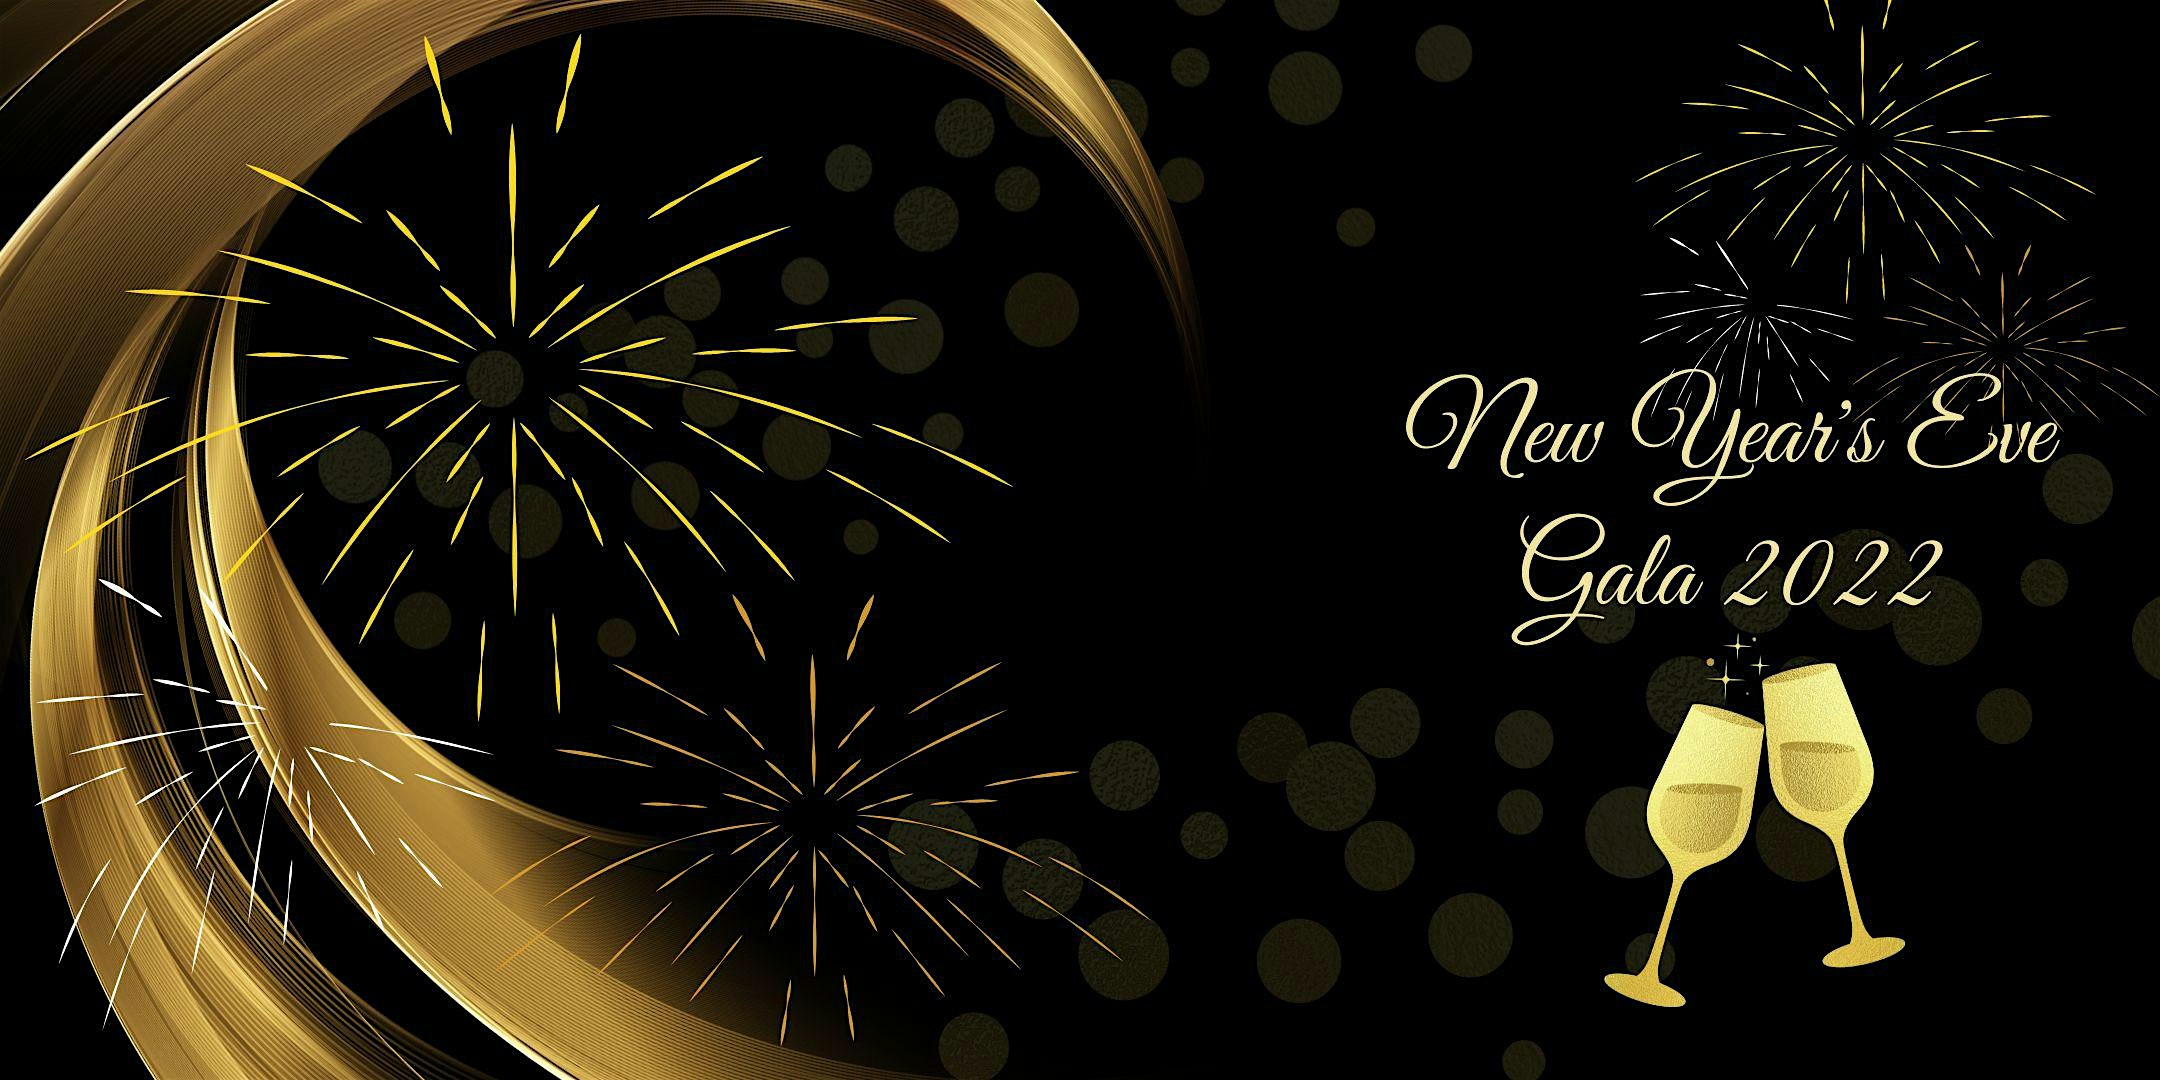 The Irish Cultural Centre’s New Years Eve Gala